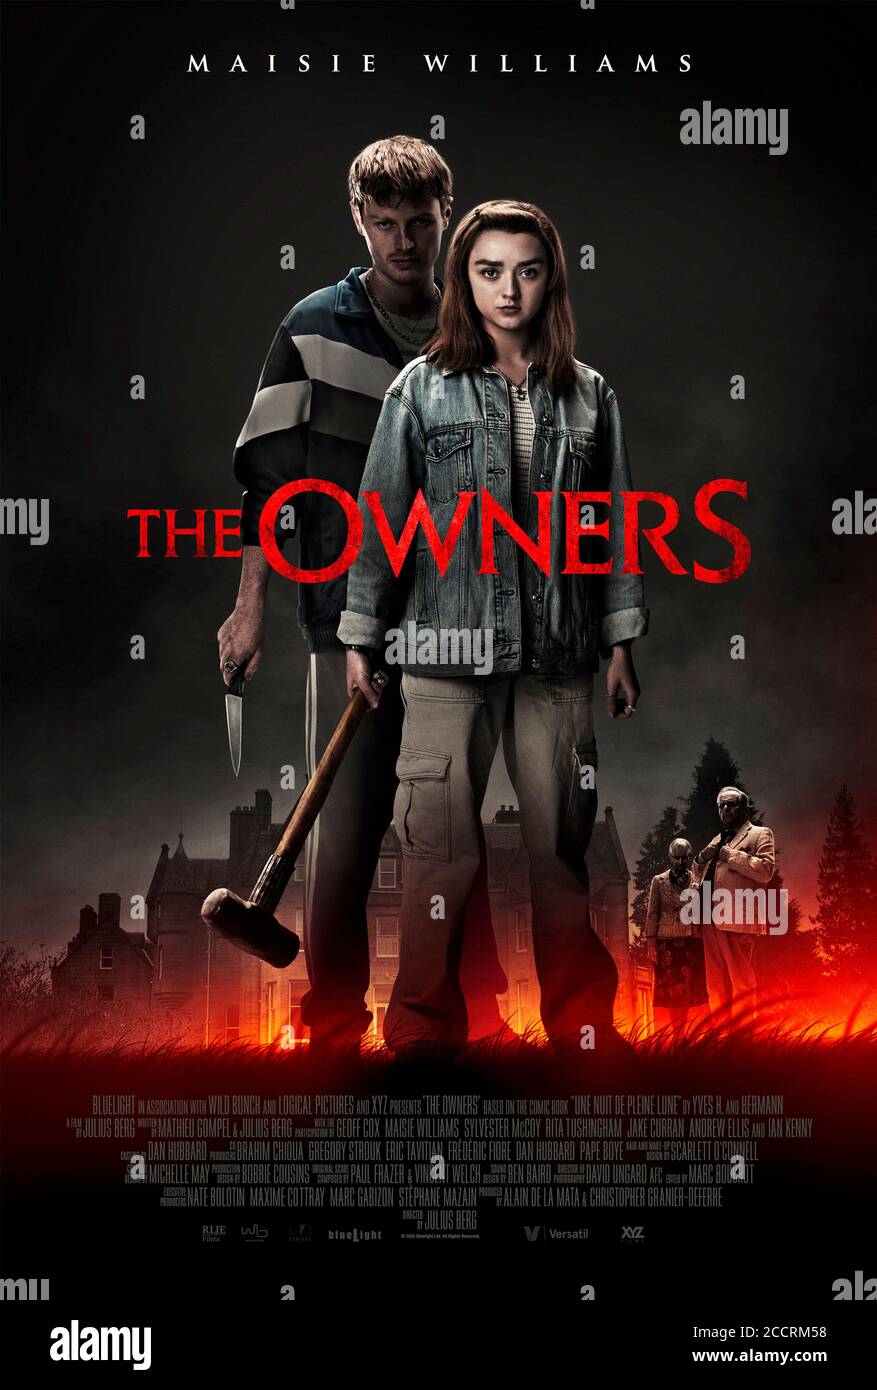 The Owners (2020) directed by Julius Berg and starring Maisie Williams, Sylvester McCoy and Rita Tushingham. Adaptation of the graphic novel Une Nuit de Plene Lune by Hermann & Yves H. about 3 thieves who rob an empty country house and find a safe of money but celebrations are short lived when the elderly owners return home. Stock Photo